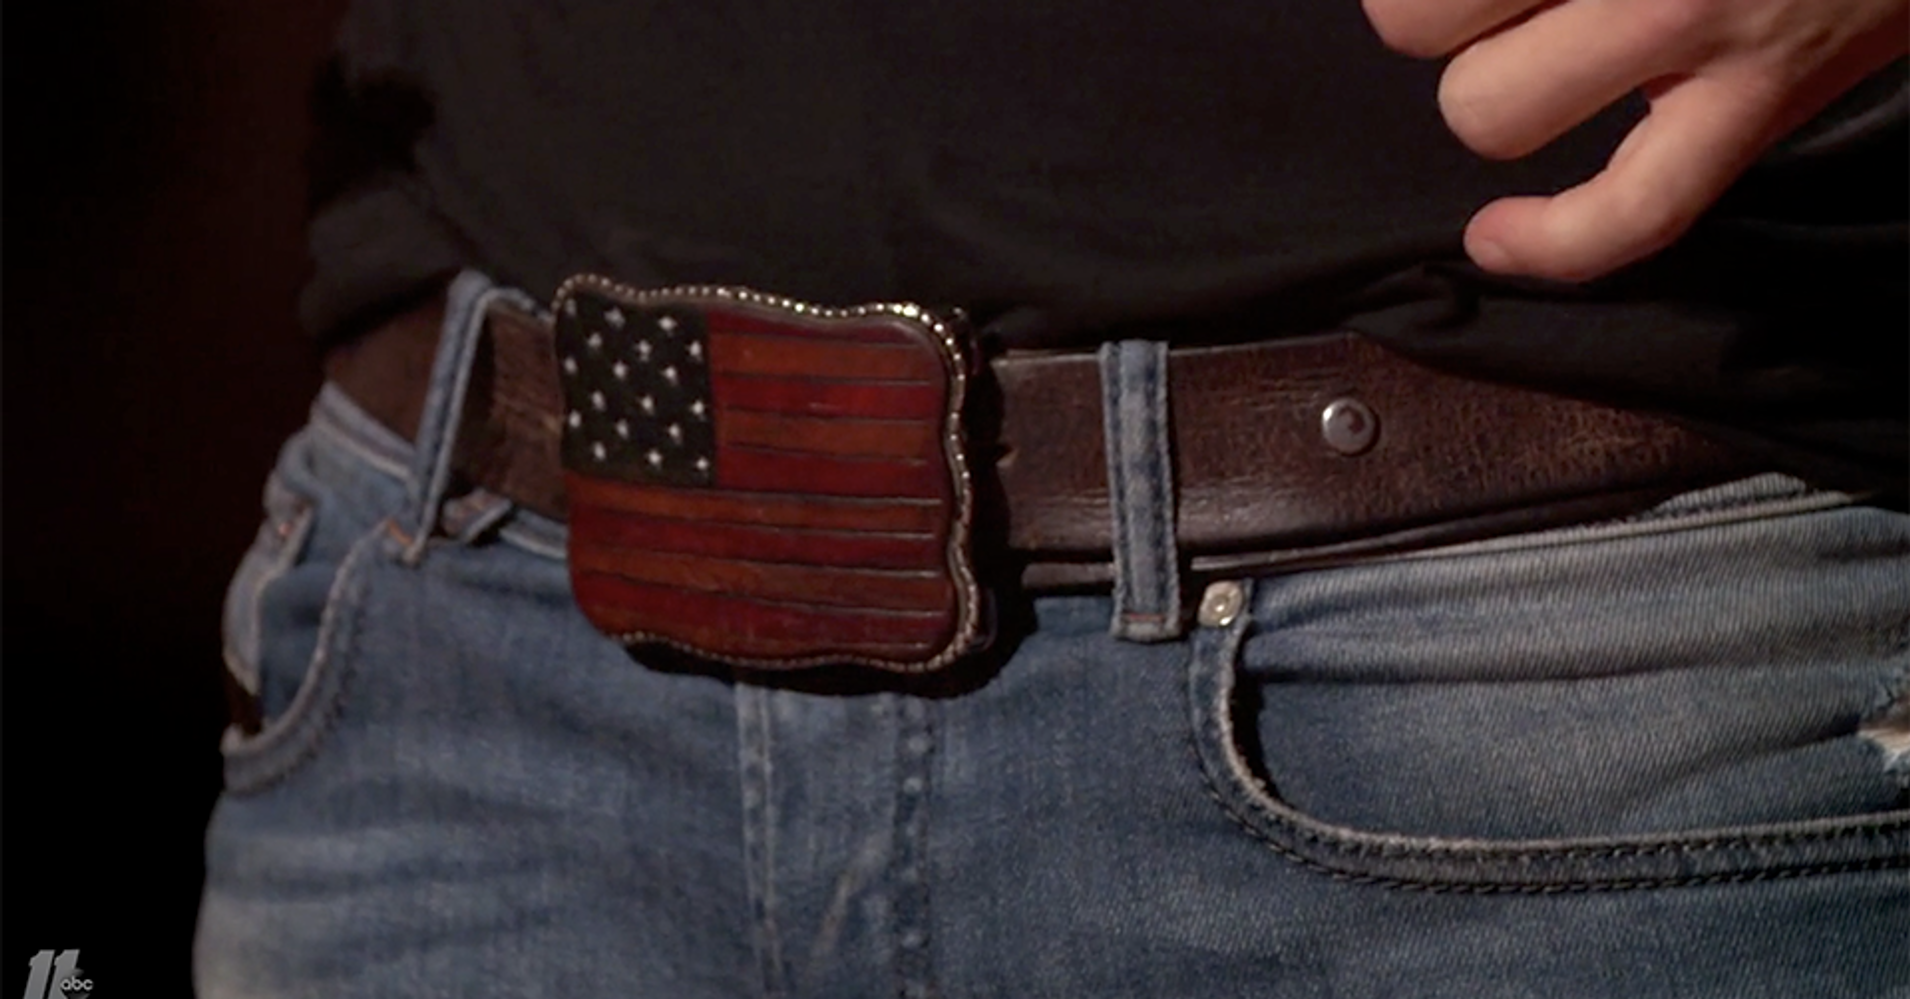 Belt Buckle That Holds Your Credit Cards on Shark Tank - Wallet Buckle | HuffPost